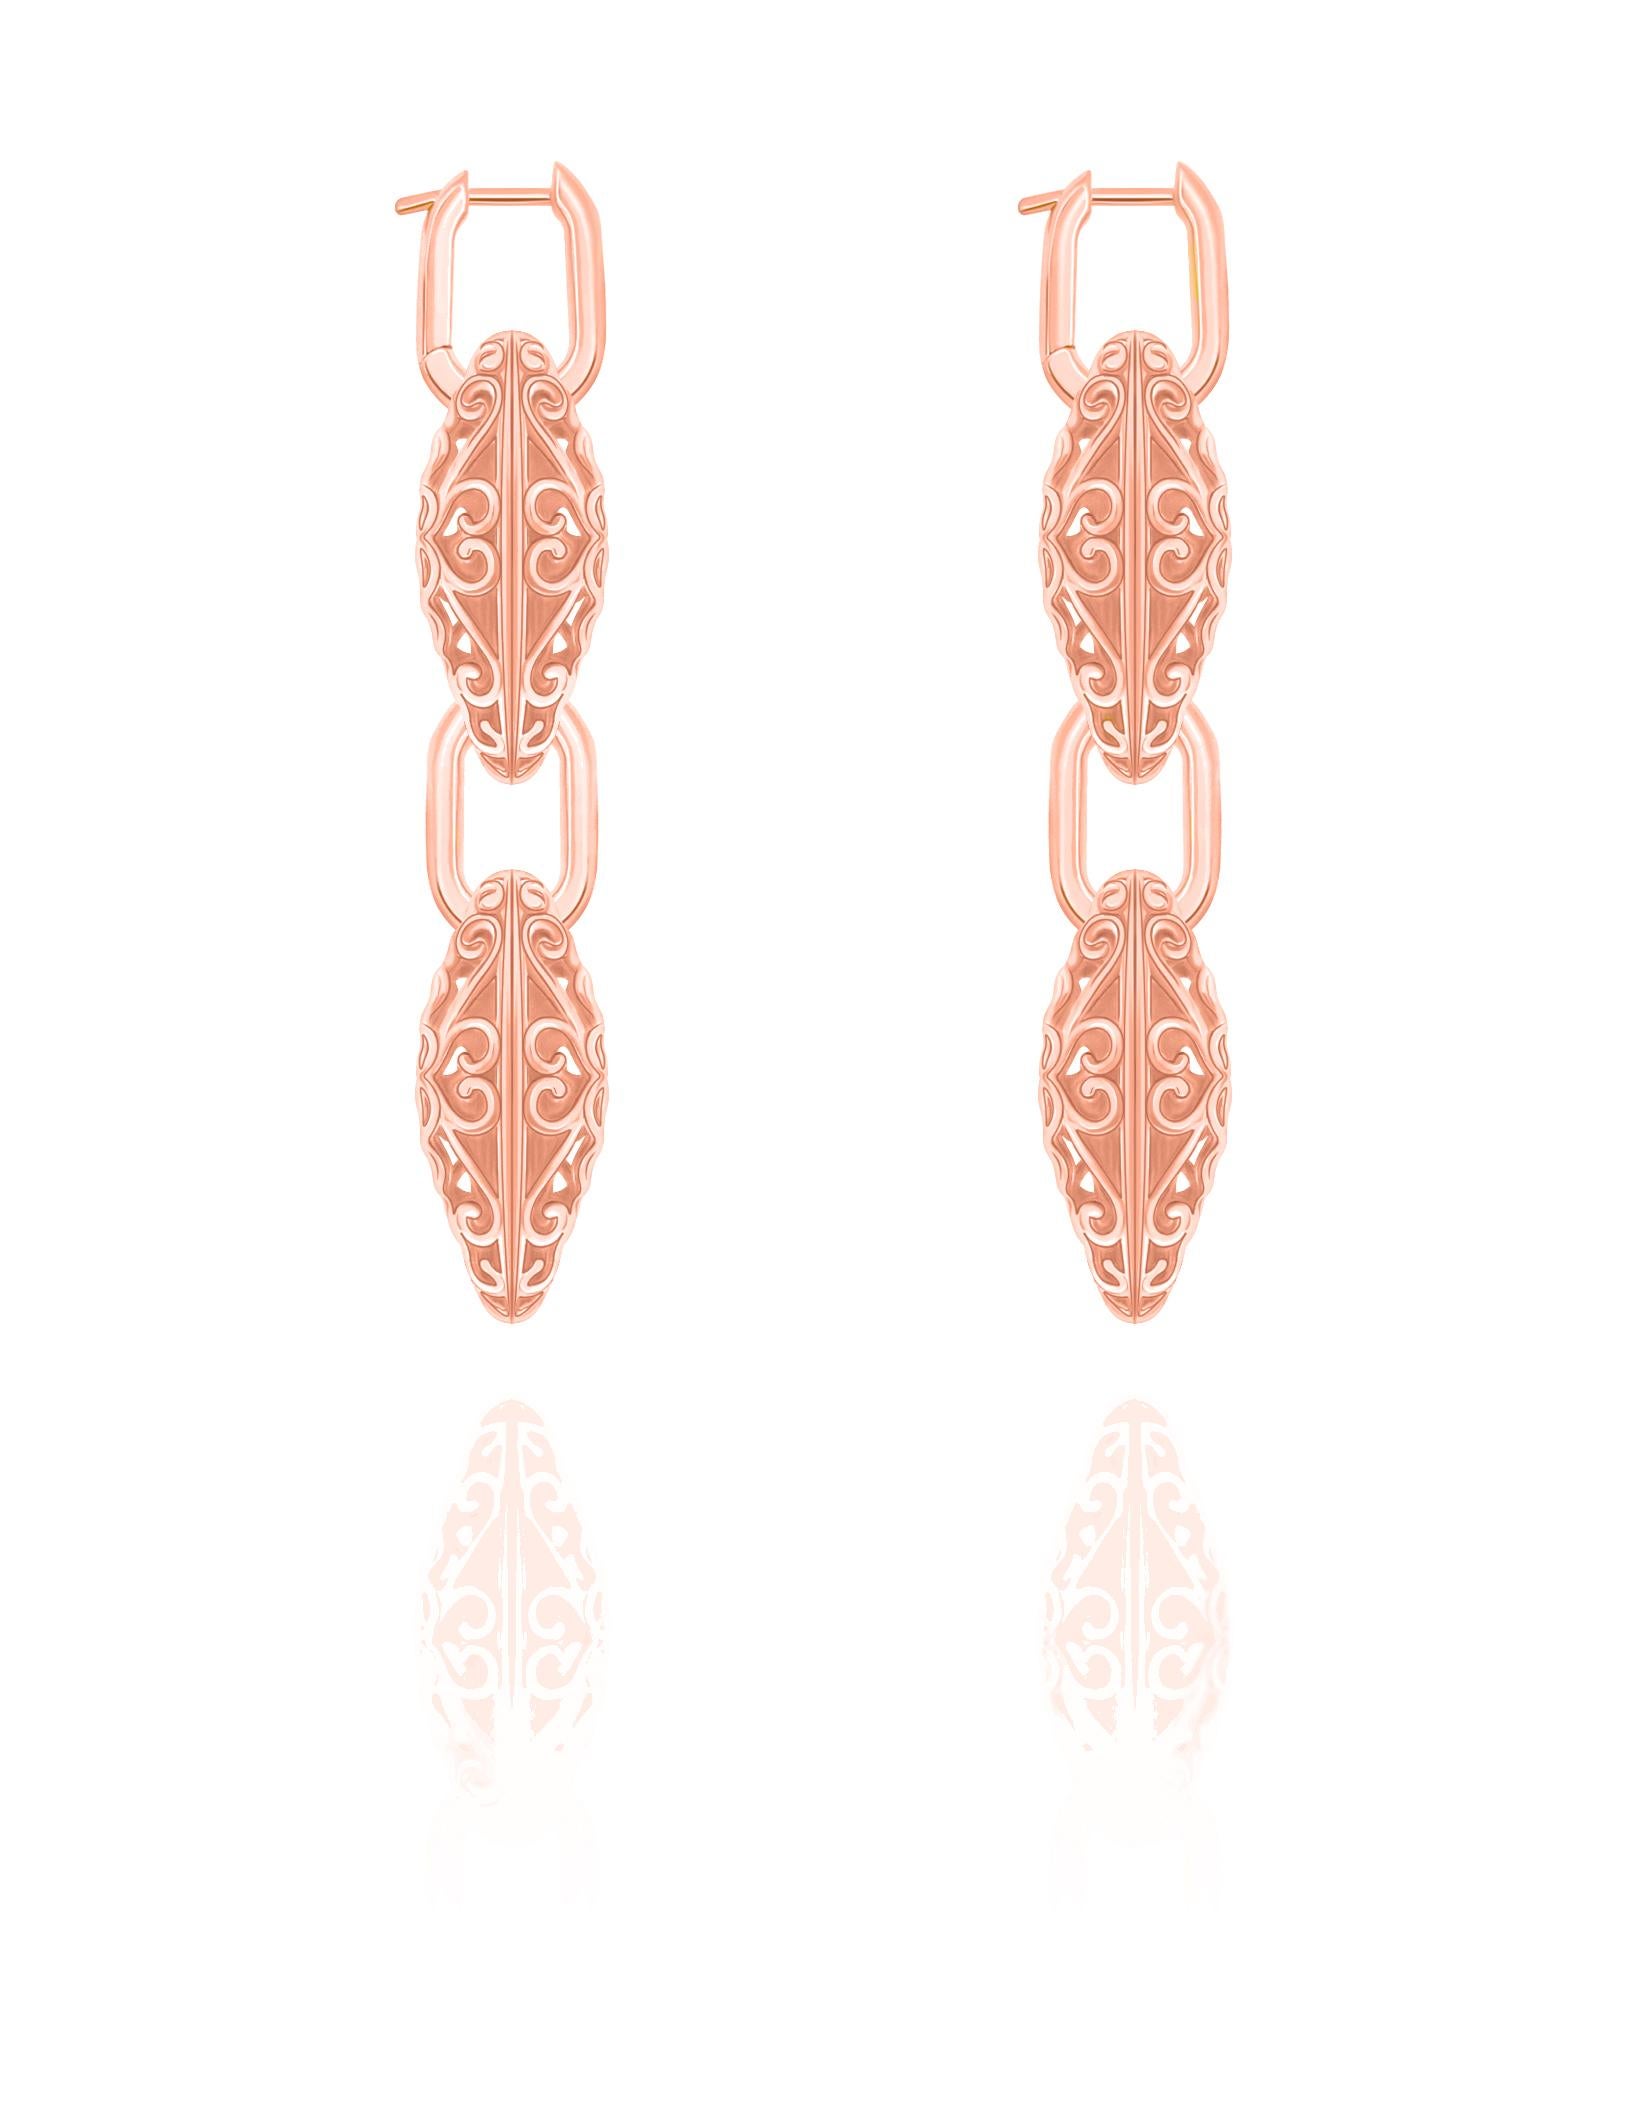 The Under The Sea Earrings - A Love Affair Collection

Dive deep into these rose gold earrings. Get inspired by the patterns of coral from the ocean. These earrings design seamlessly compliments the jewelry design of the Under the Sea Necklace.